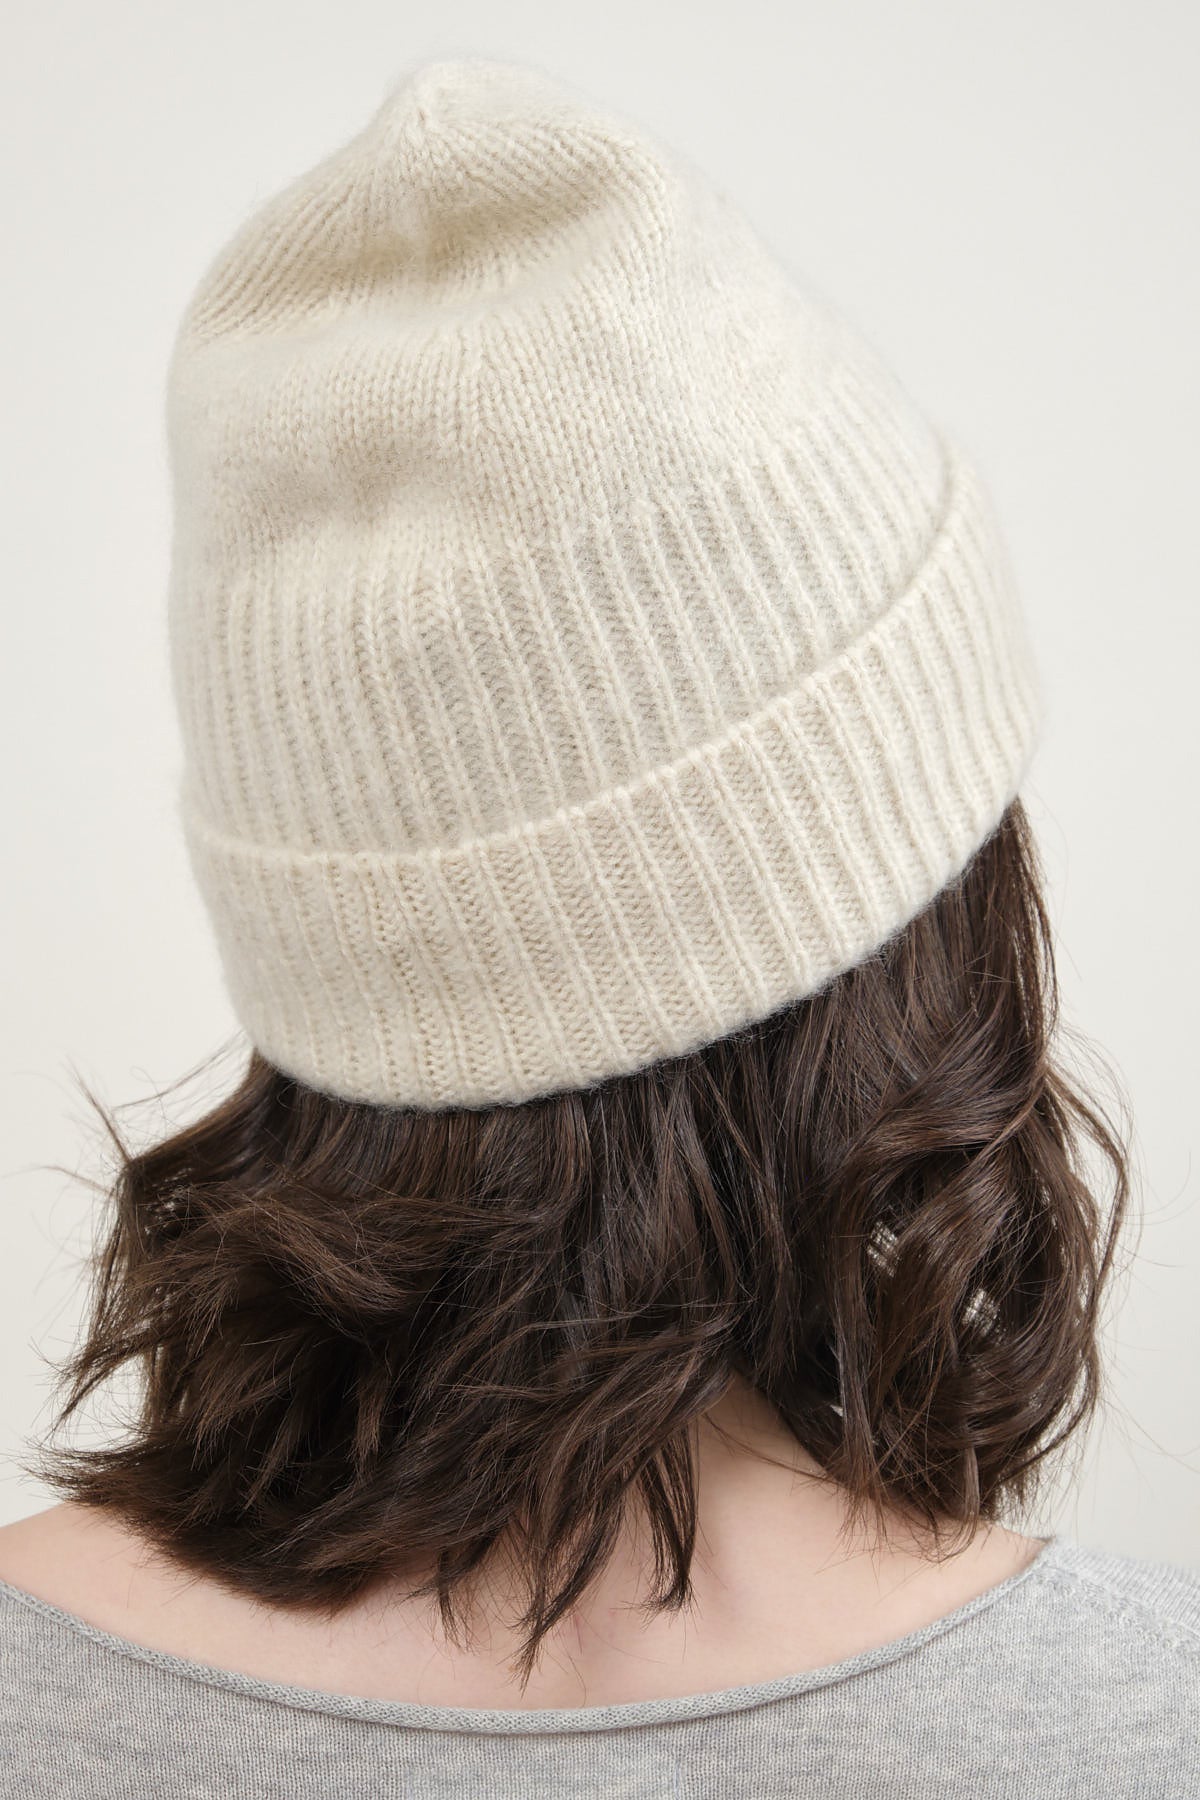 Back of Knit Cap in Natural